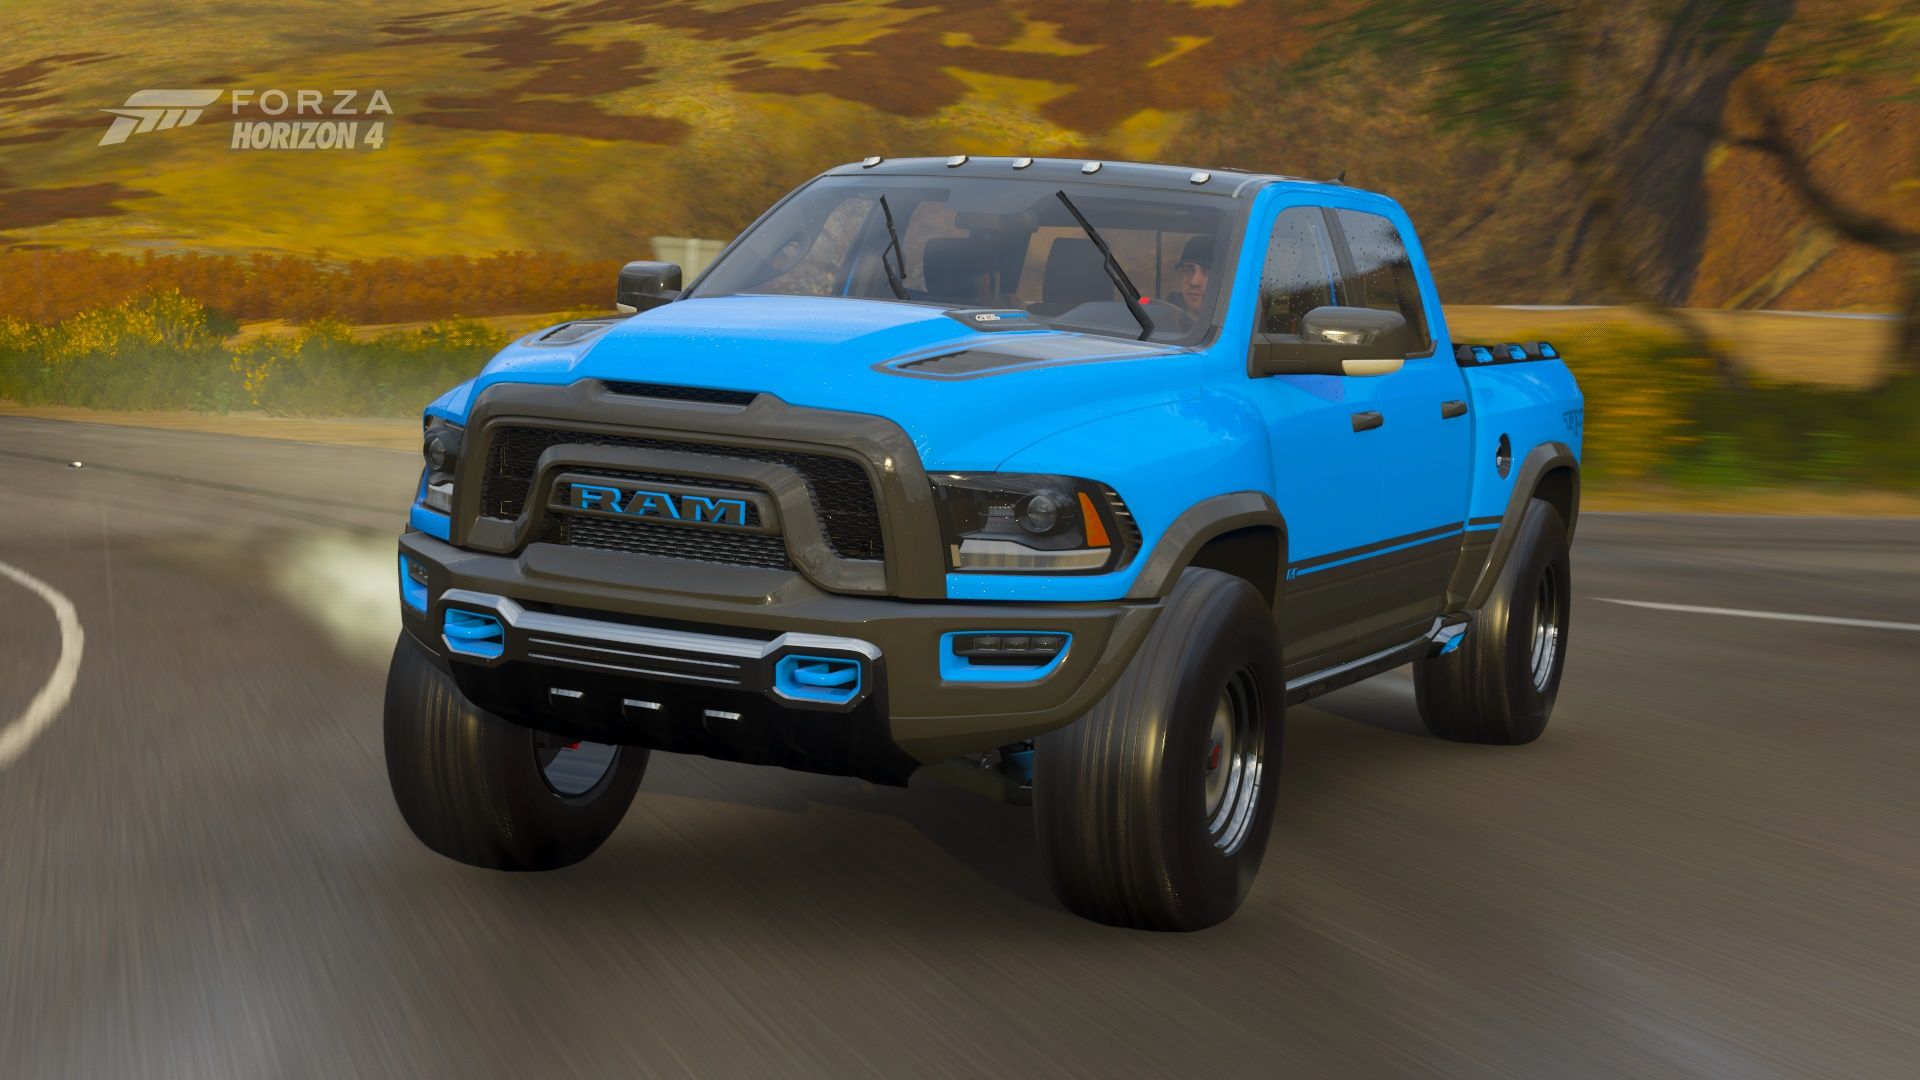 UPDATED: Ram Rebel TRX Concept One Of The Stars Of New Forza Horizon 4 Expansion Bundle